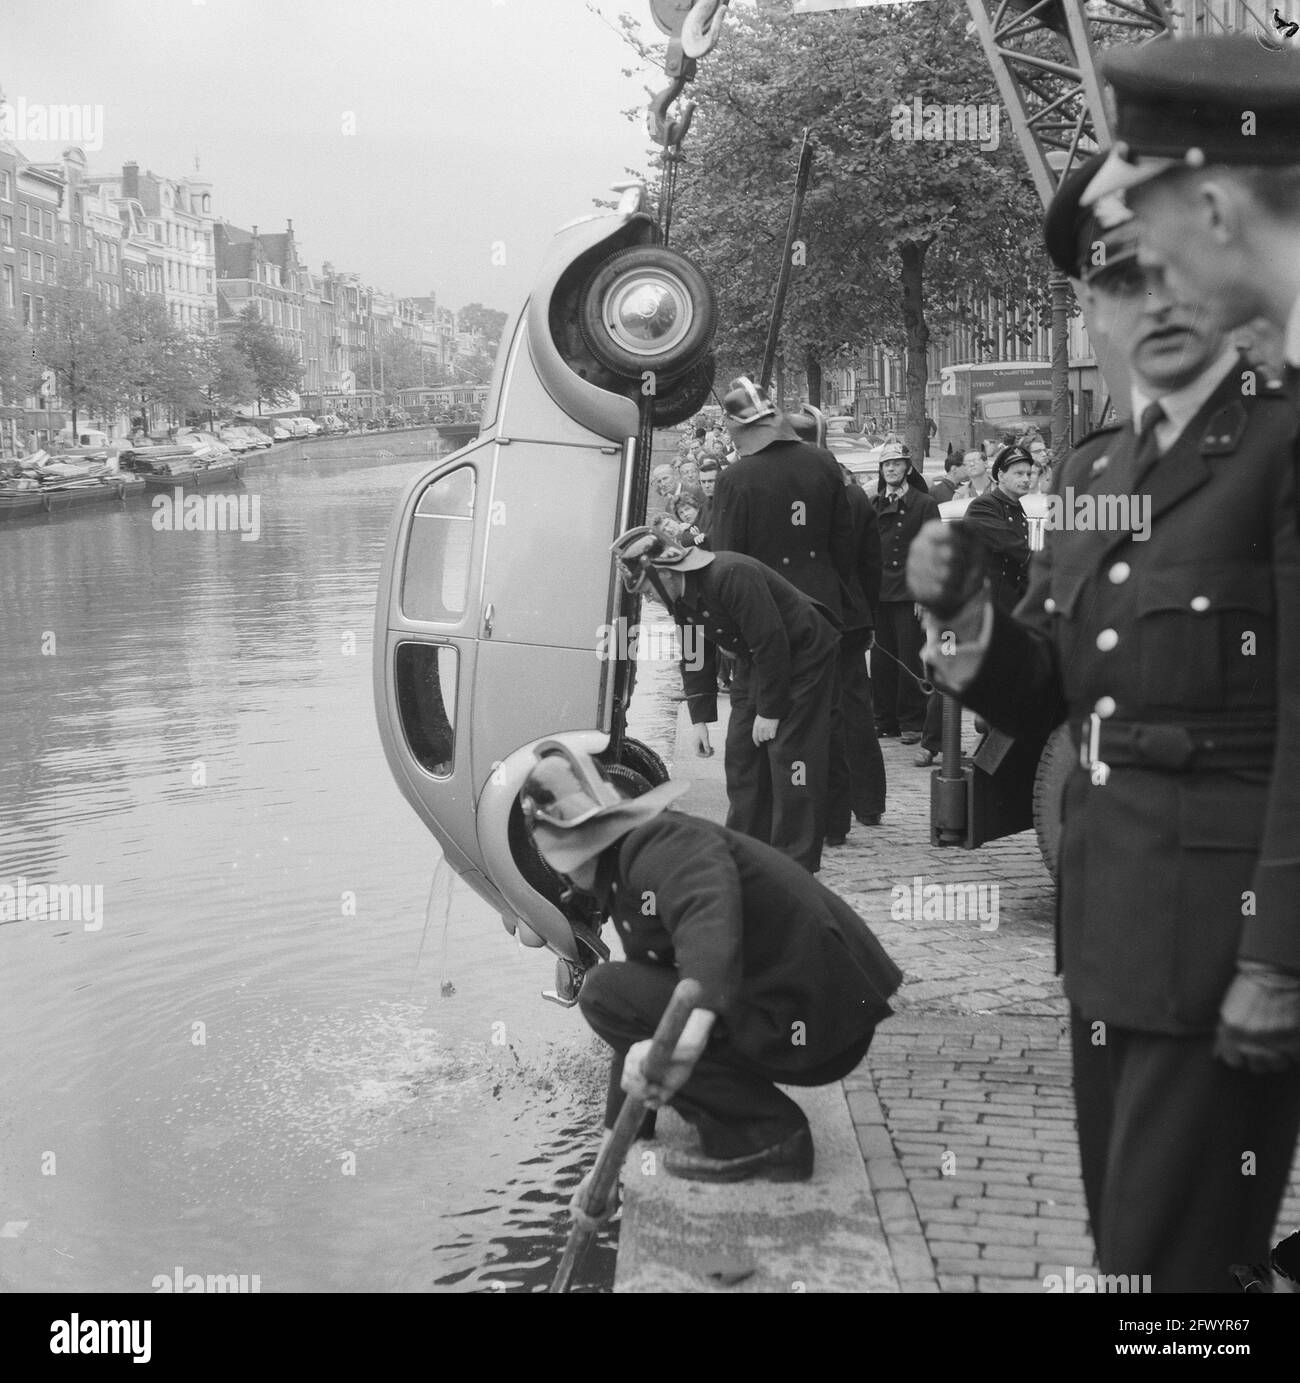 Car collision intersection Reguliersgracht Keizersgracht, Volkswagen is pulled out of the canal, September 21, 1960, Car collisions, canals, The Netherlands, 20th century press agency photo, news to remember, documentary, historic photography 1945-1990, visual stories, human history of the Twentieth Century, capturing moments in time Stock Photo